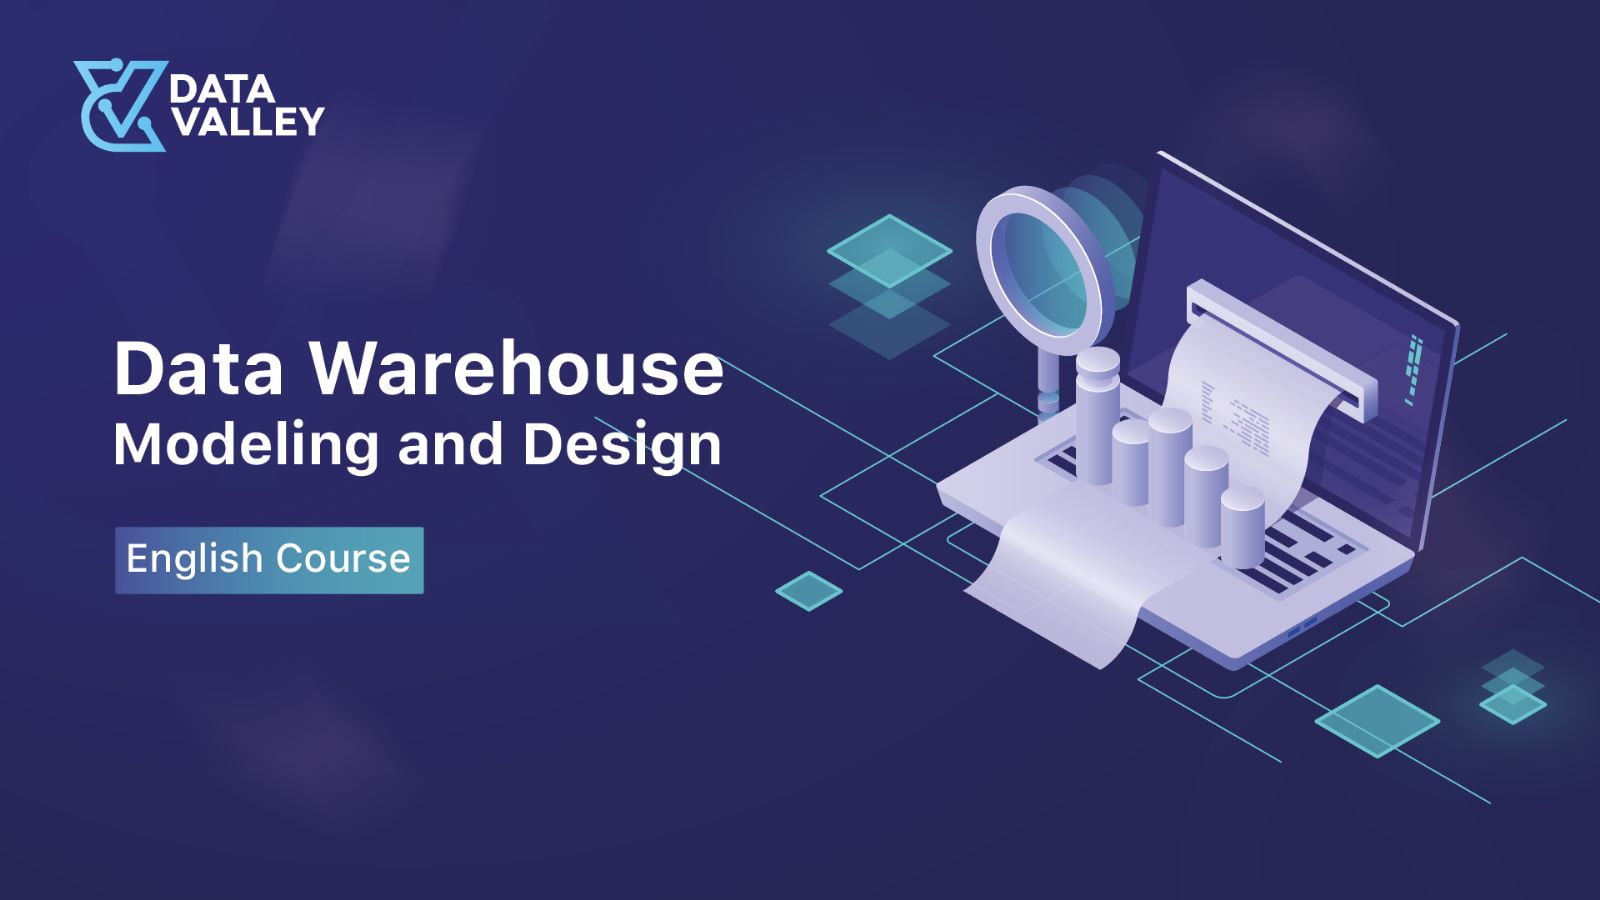 Data Warehouse Modeling and Design